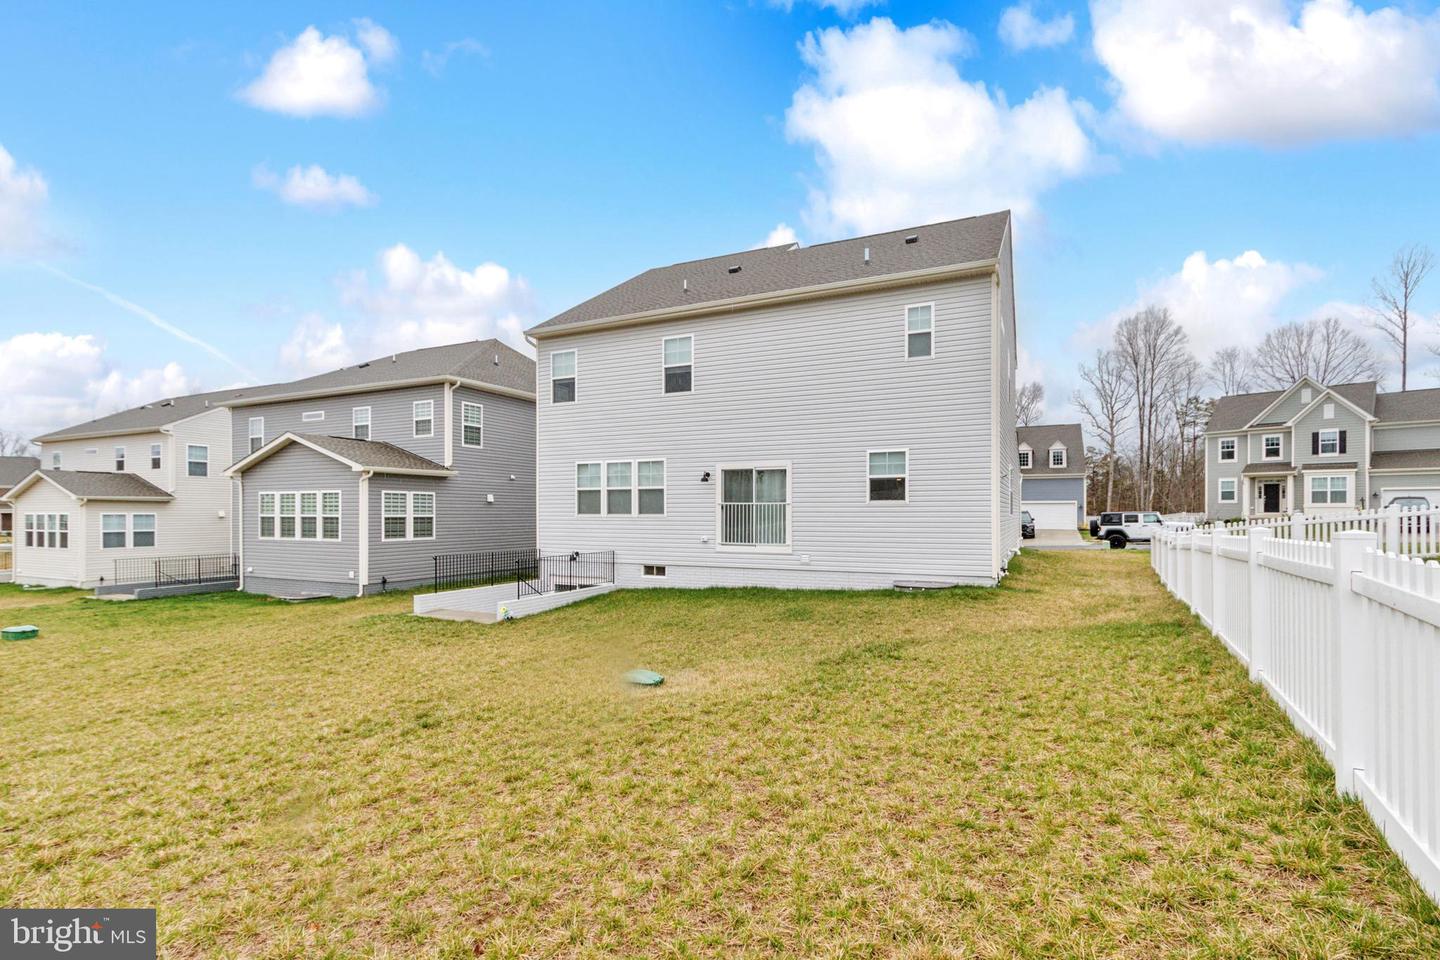 2085 WHITHORN HILL, JEFFERSONTON, Virginia 22724, 5 Bedrooms Bedrooms, ,4 BathroomsBathrooms,Residential,For sale,2085 WHITHORN HILL,VACU2008282 MLS # VACU2008282